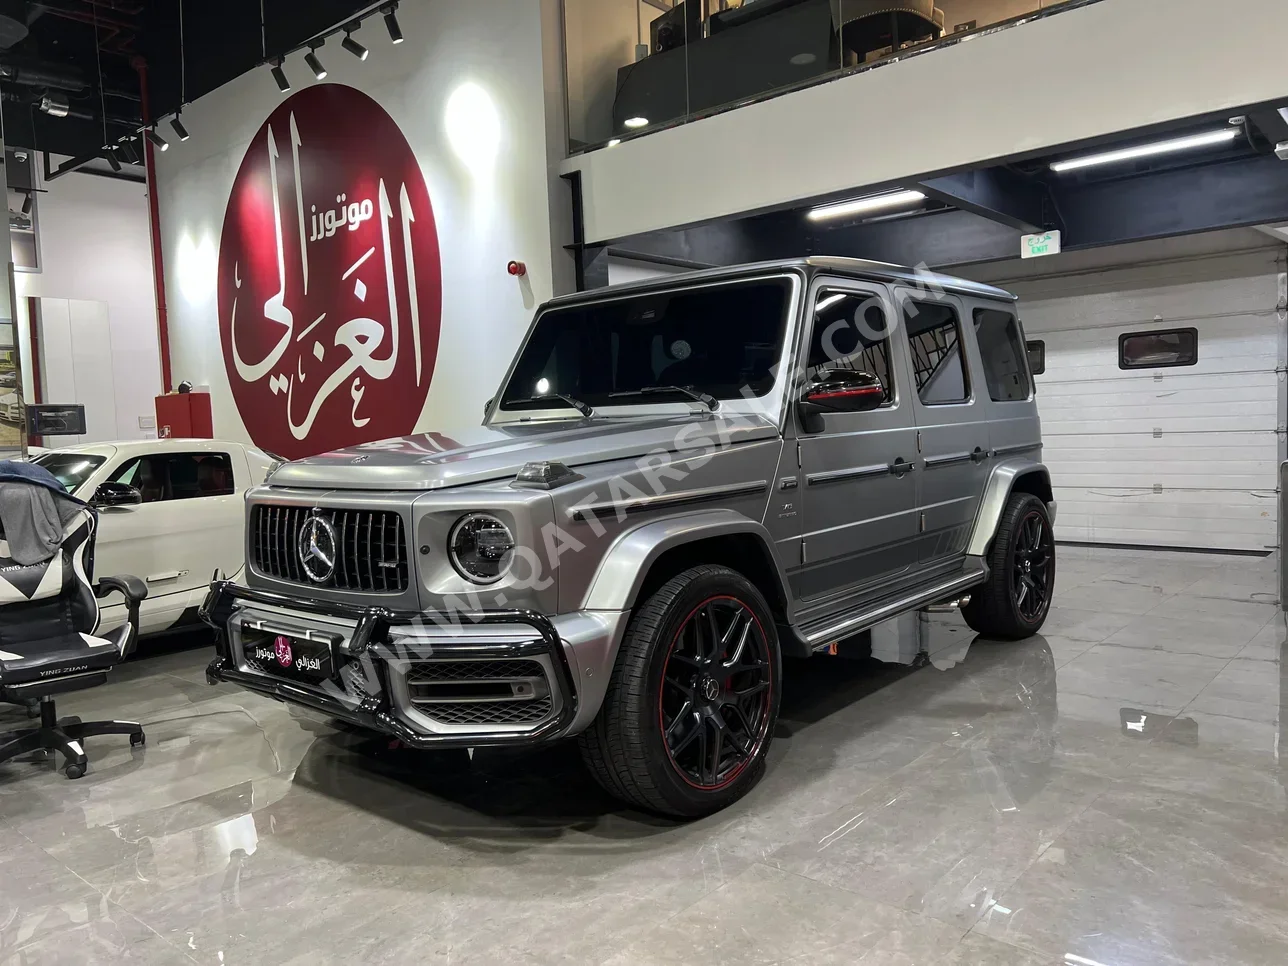  Mercedes-Benz  G-Class  63 Night Pack  2019  Automatic  100,000 Km  8 Cylinder  Four Wheel Drive (4WD)  SUV  Gray Matte  With Warranty